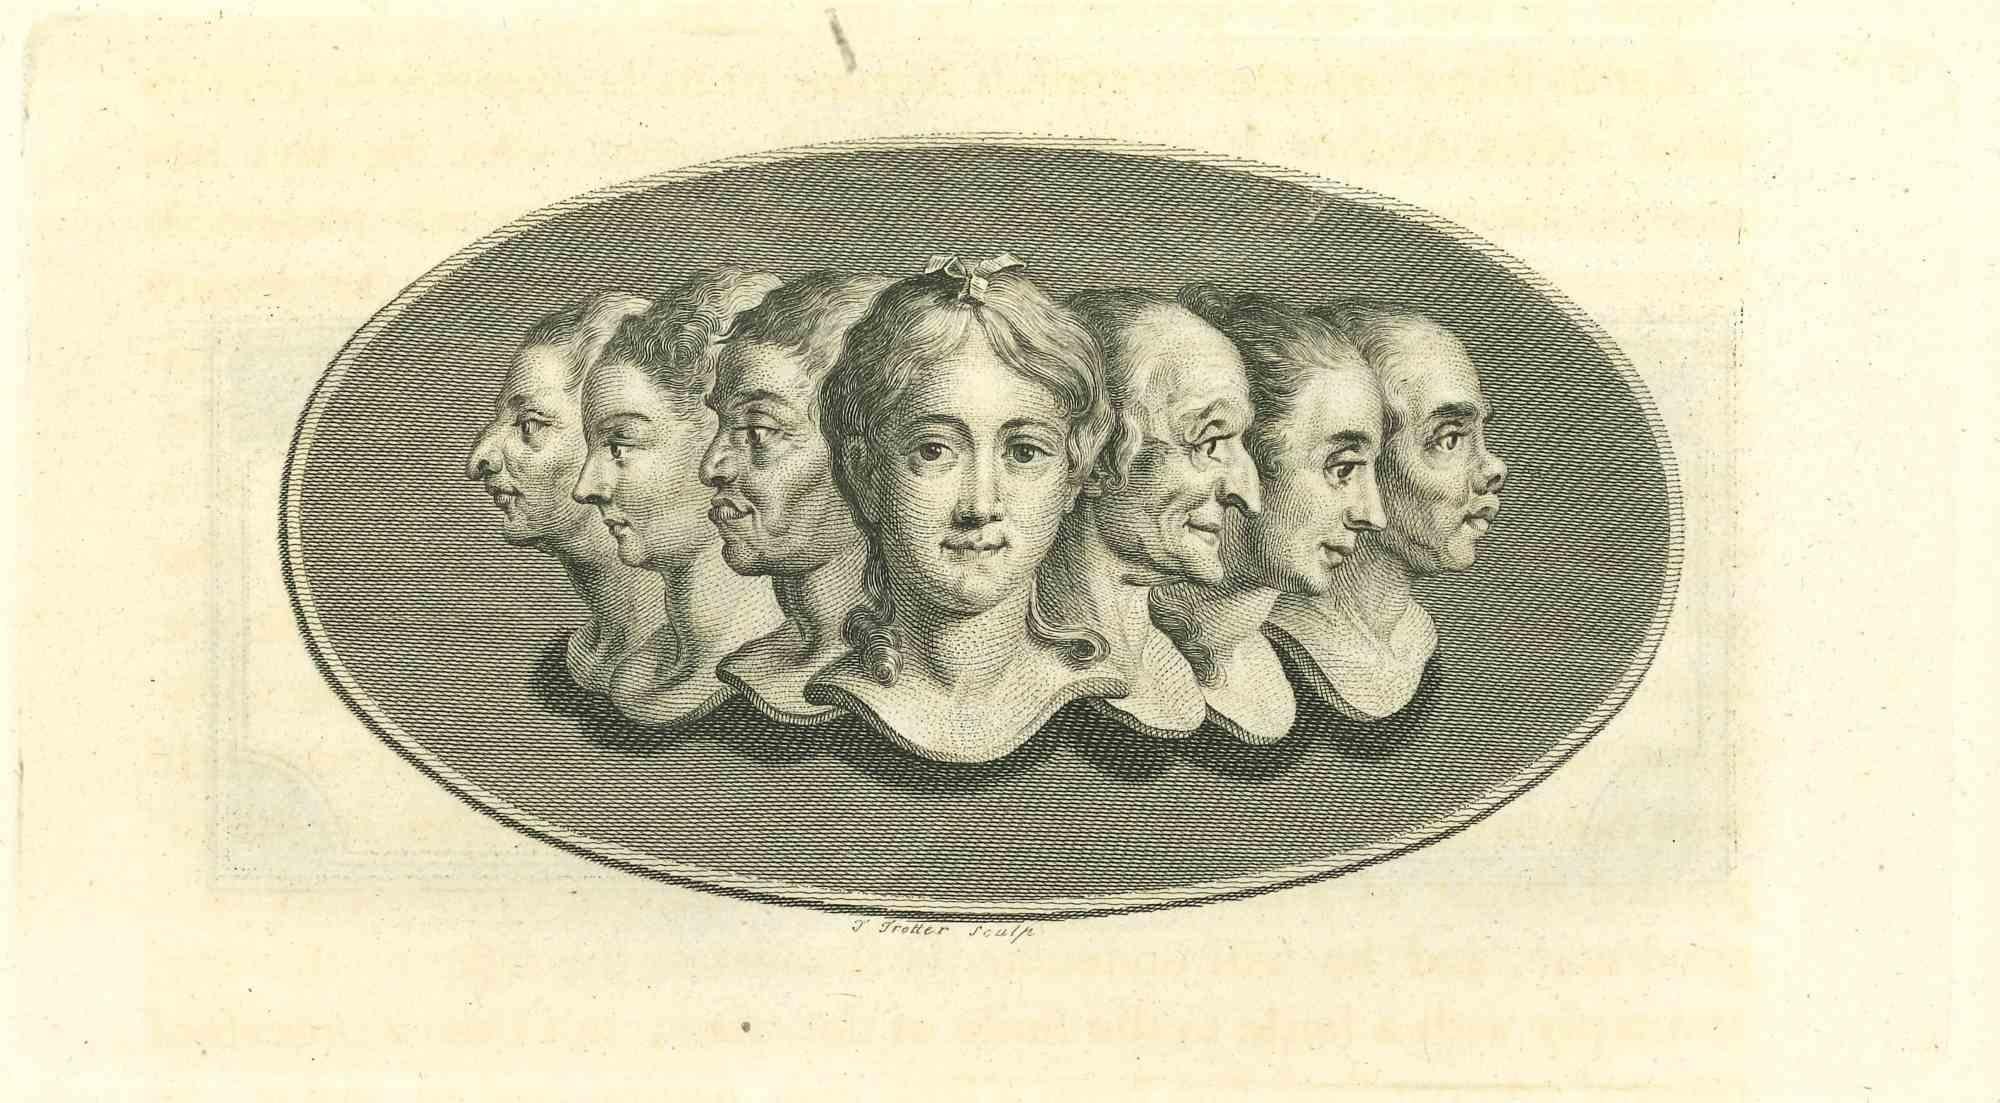 Heads of women is an original artwork realized by Thomas Holloway for Johann Caspar Lavater's  "Essays on Physiognomy, Designed to promote the Knowledge and the Love of Mankind", London, Bensley, 1810. 

 This artwork portrays heads of women. On the